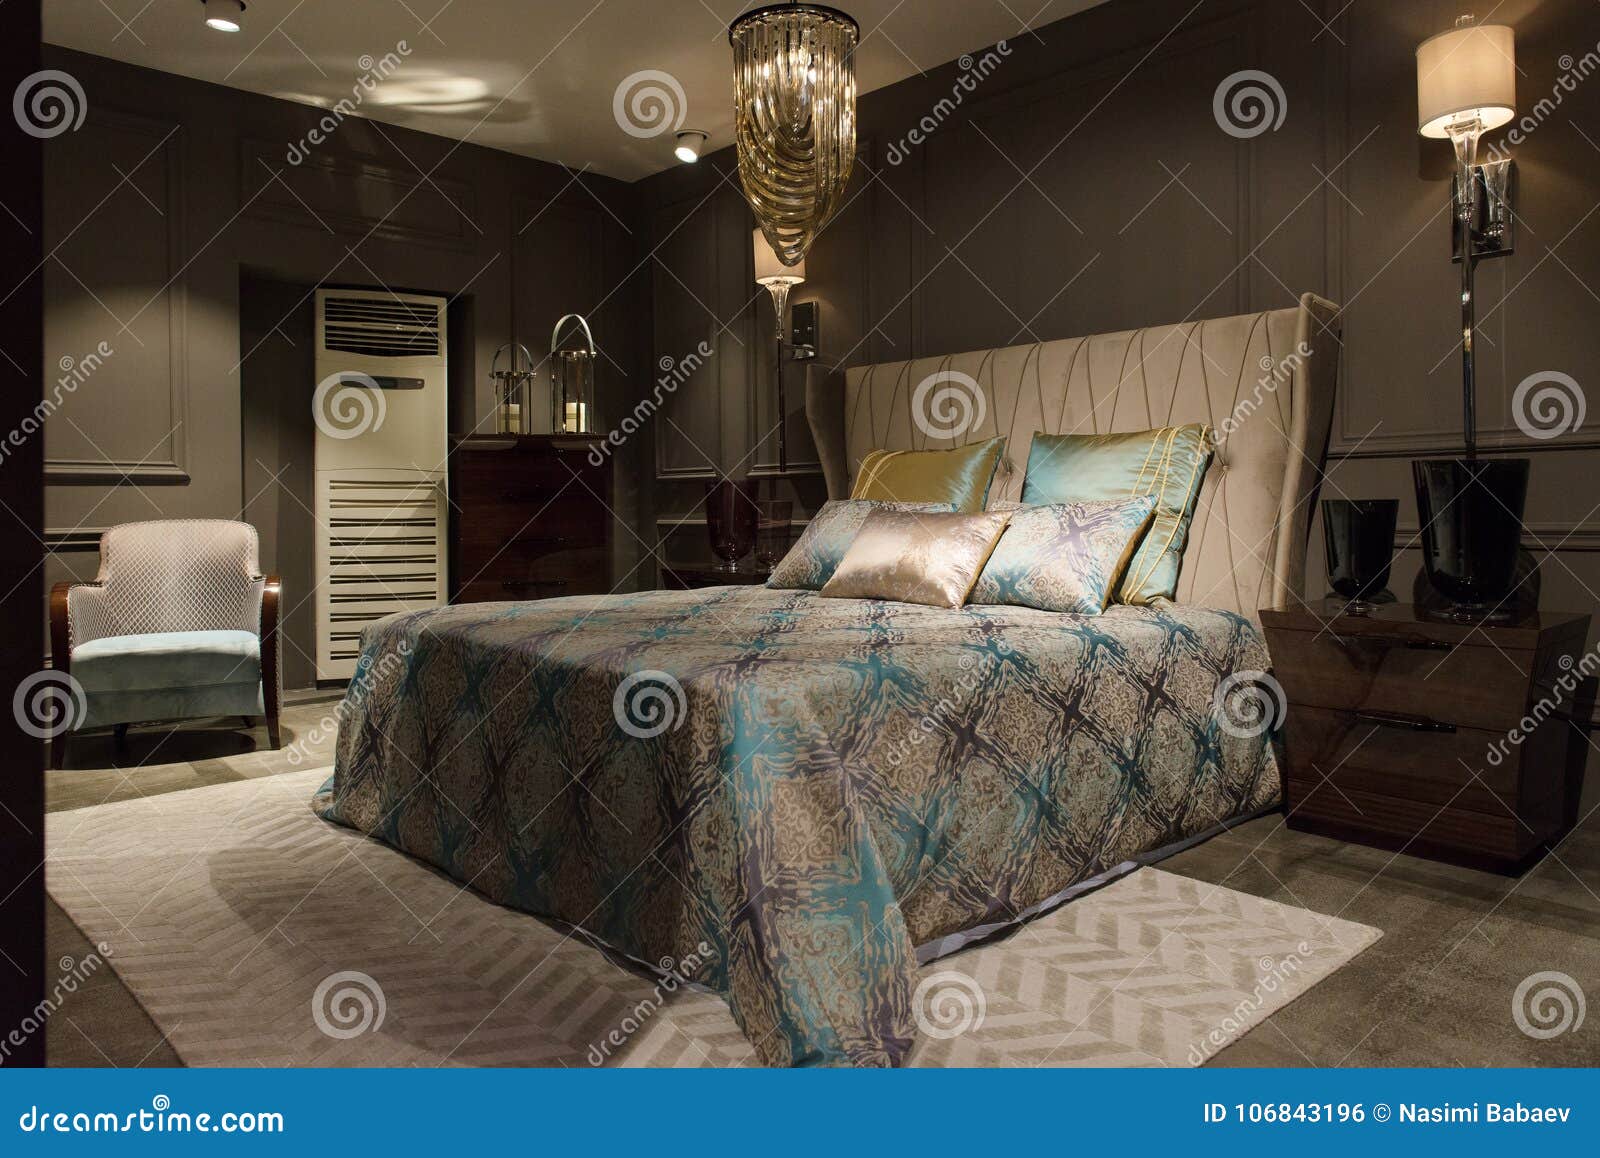 Luxury Bedroom Interior With Carved Wood Bed Dresser And Nights